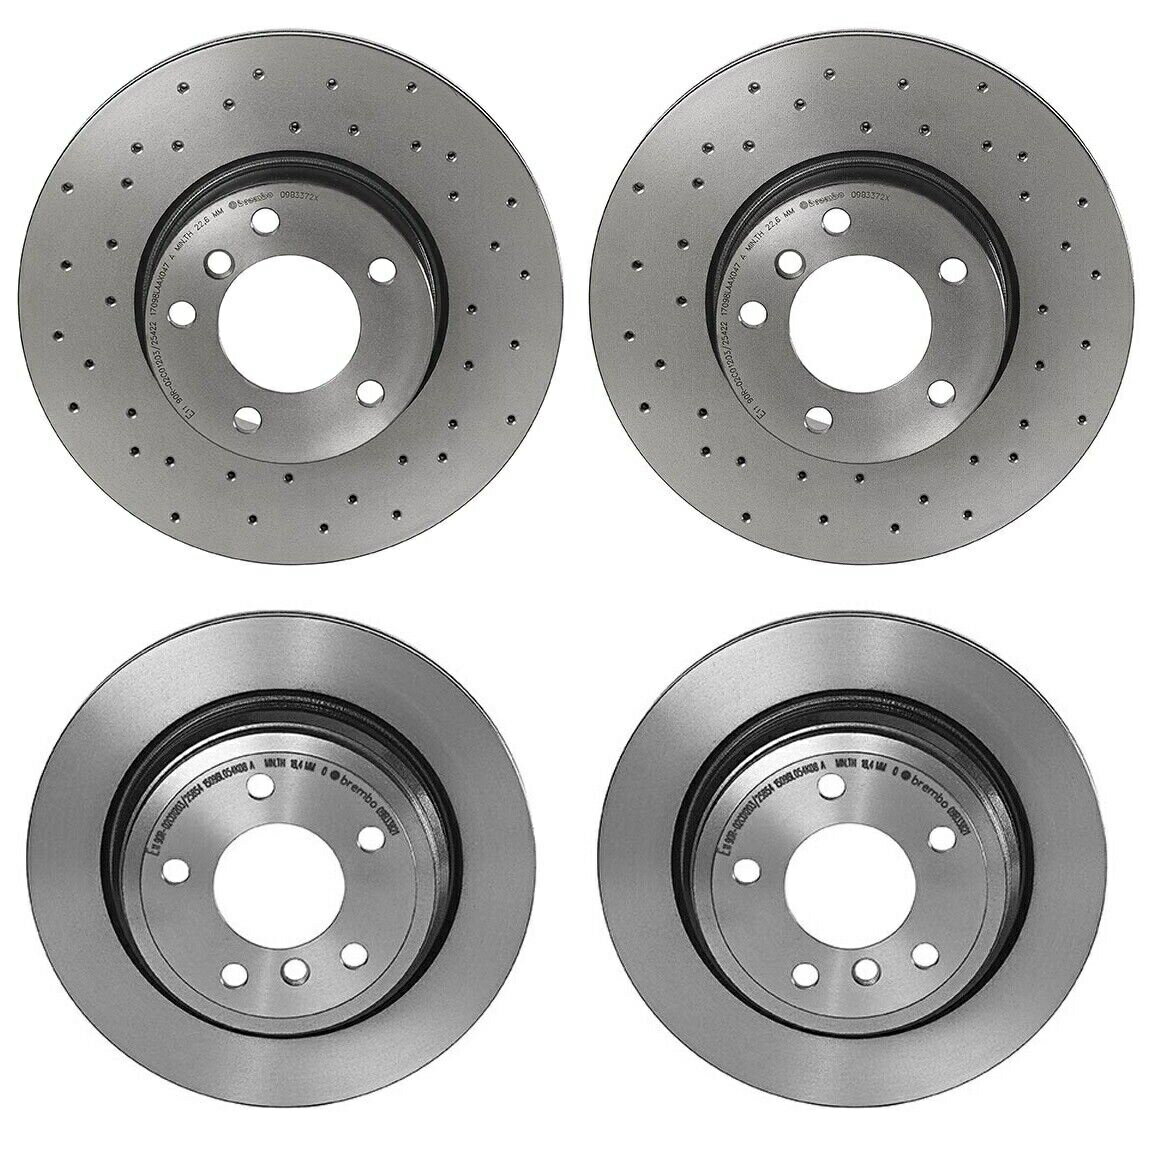 brake disc rotor ディスク-3gdシリーズシリーズスロットローターリア12-18グランドチェロキー Brembo Front X-Drilled and Rear Coated Brake Disc Rotors Kit For BMW E91 E93 E84